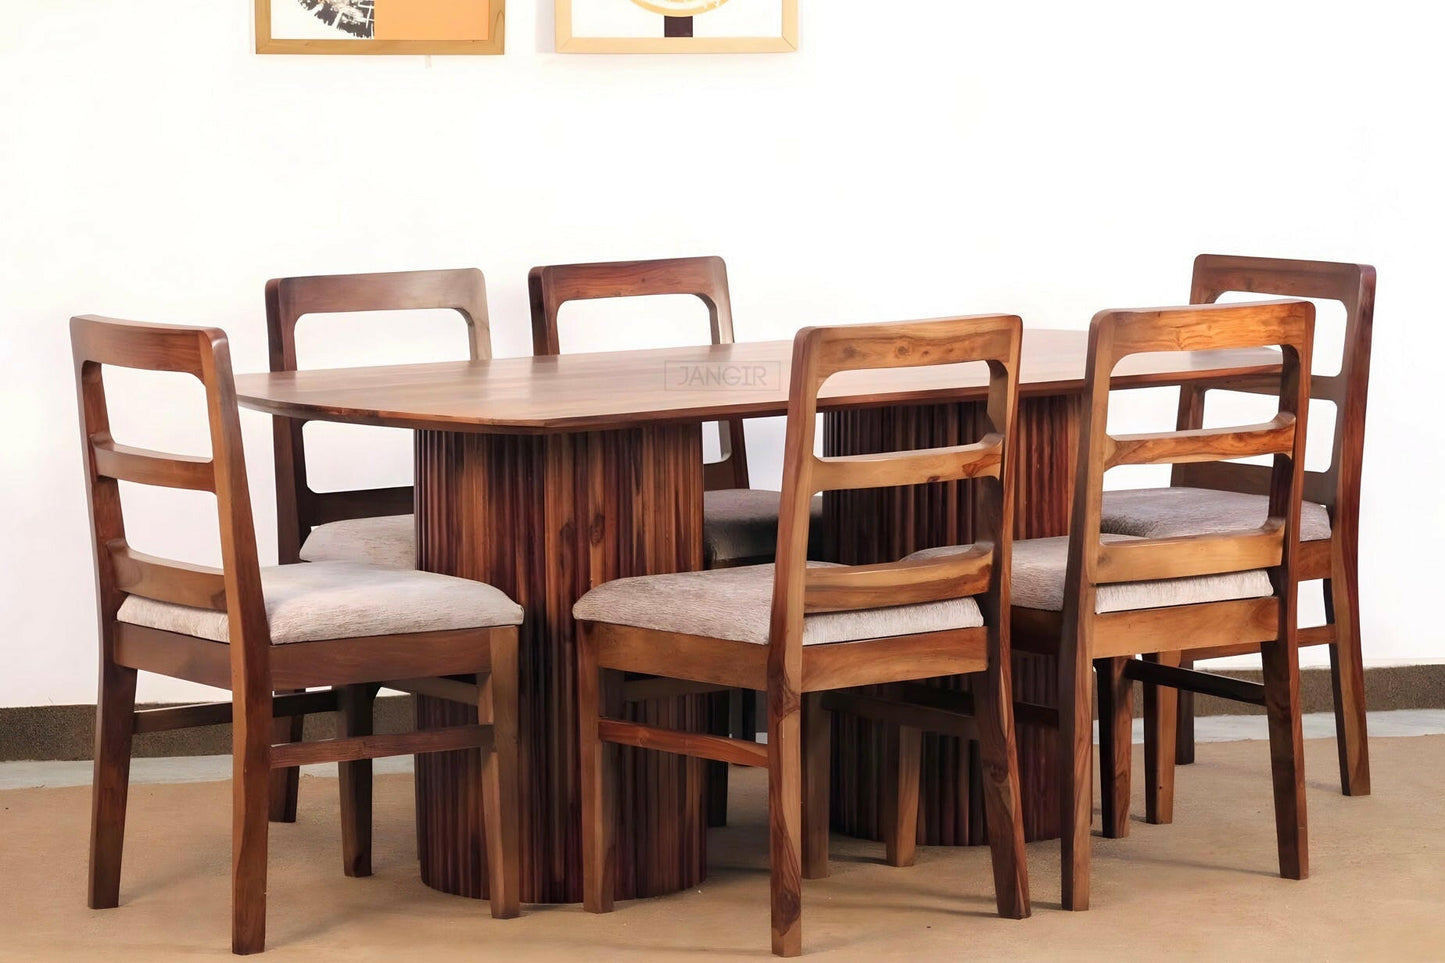 Looking for a modern and stylish dining table set? Check out our exquisite dining table set, crafted with sheesham wood, perfect for six-seater gatherings. Buy online or in-store at Bangalore today!